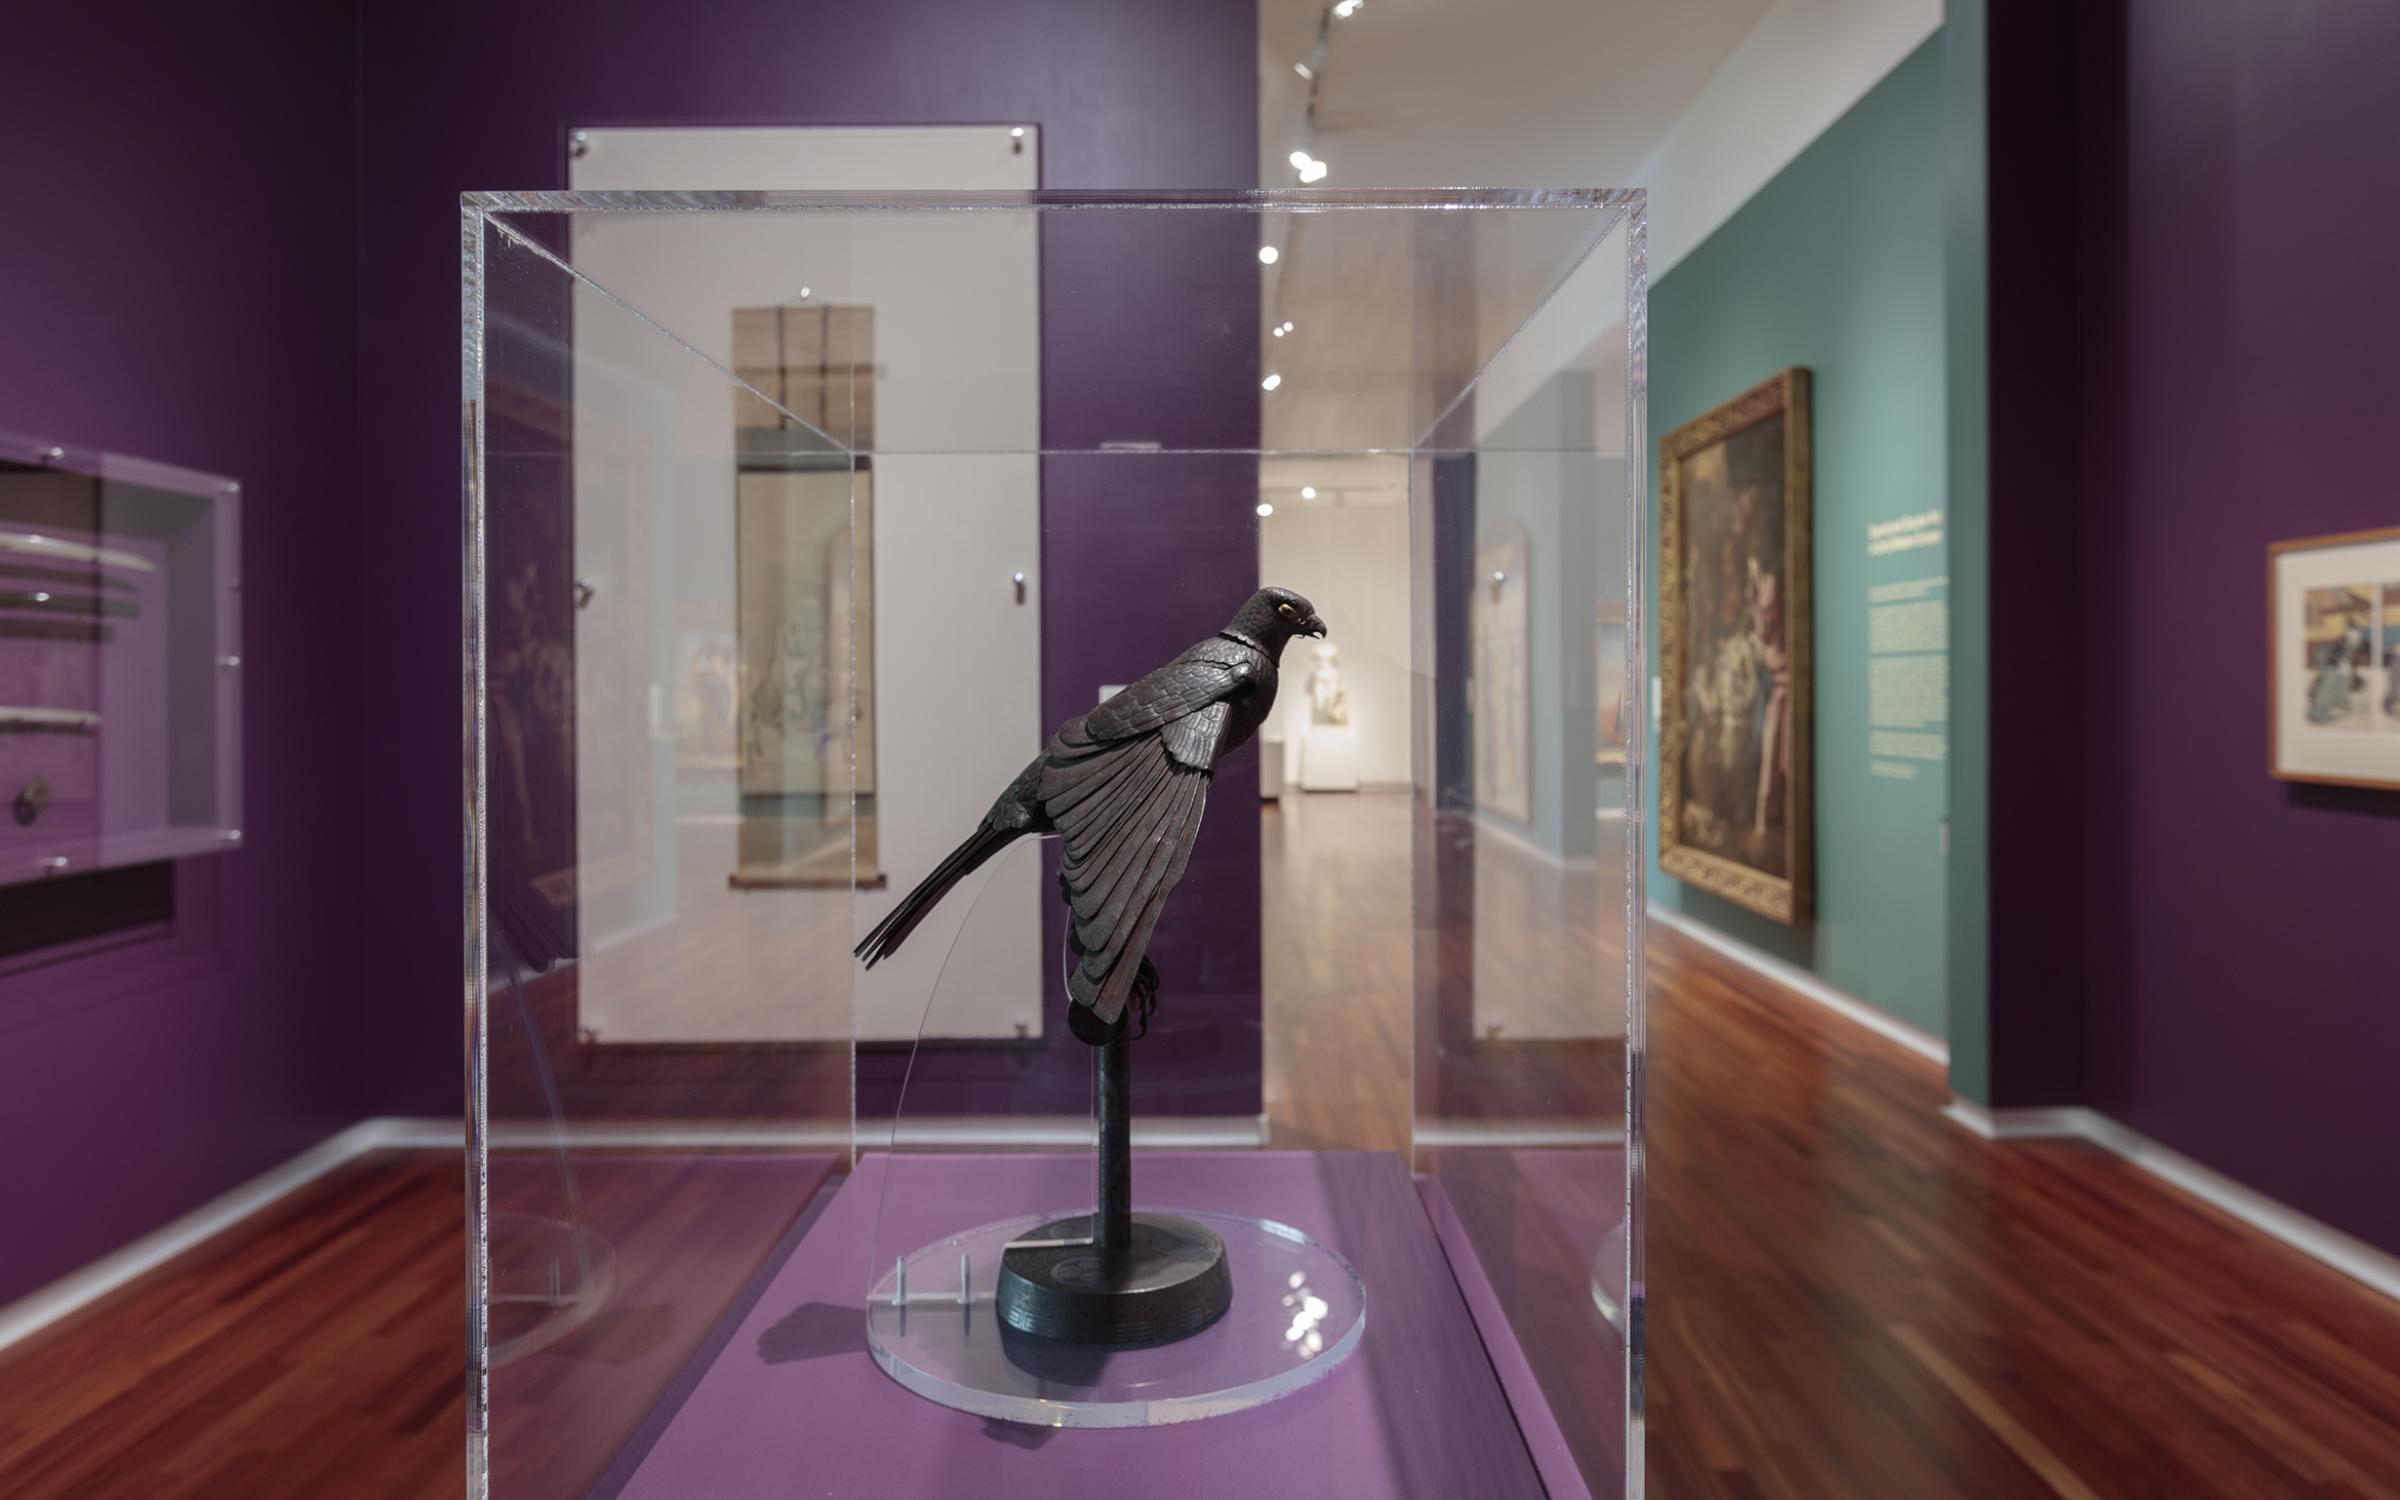 A brown sculpture of a small bird sits on a narrow stand in a glass case in the center of the room. The walls are a deep purple and there are samurai swords hanging on the wall to the left in a glass display case. There is a long painted scroll on the purple wall in the background and dark green walls with framed art down the hallway to the right.